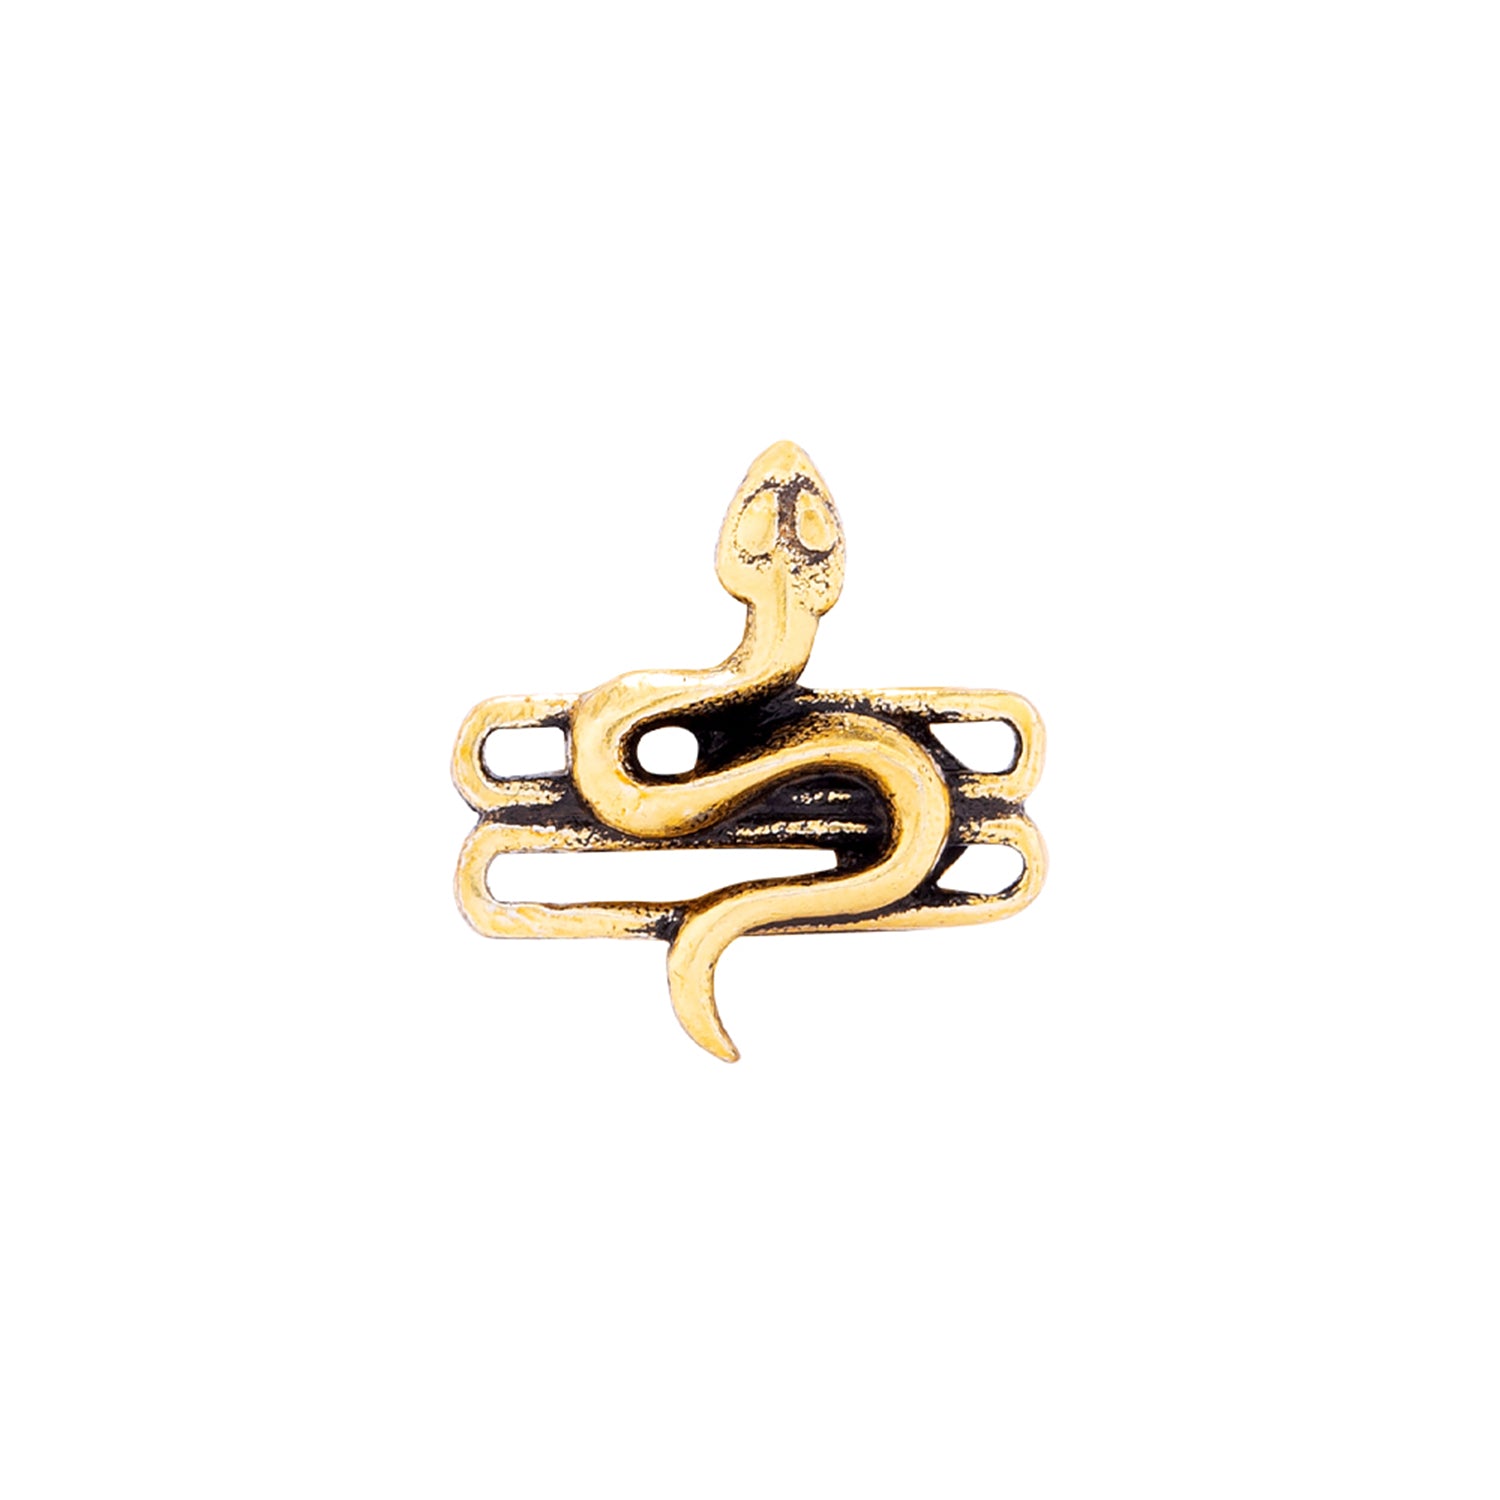 Religious Studs Lord Shiva Serpent Stud Earring